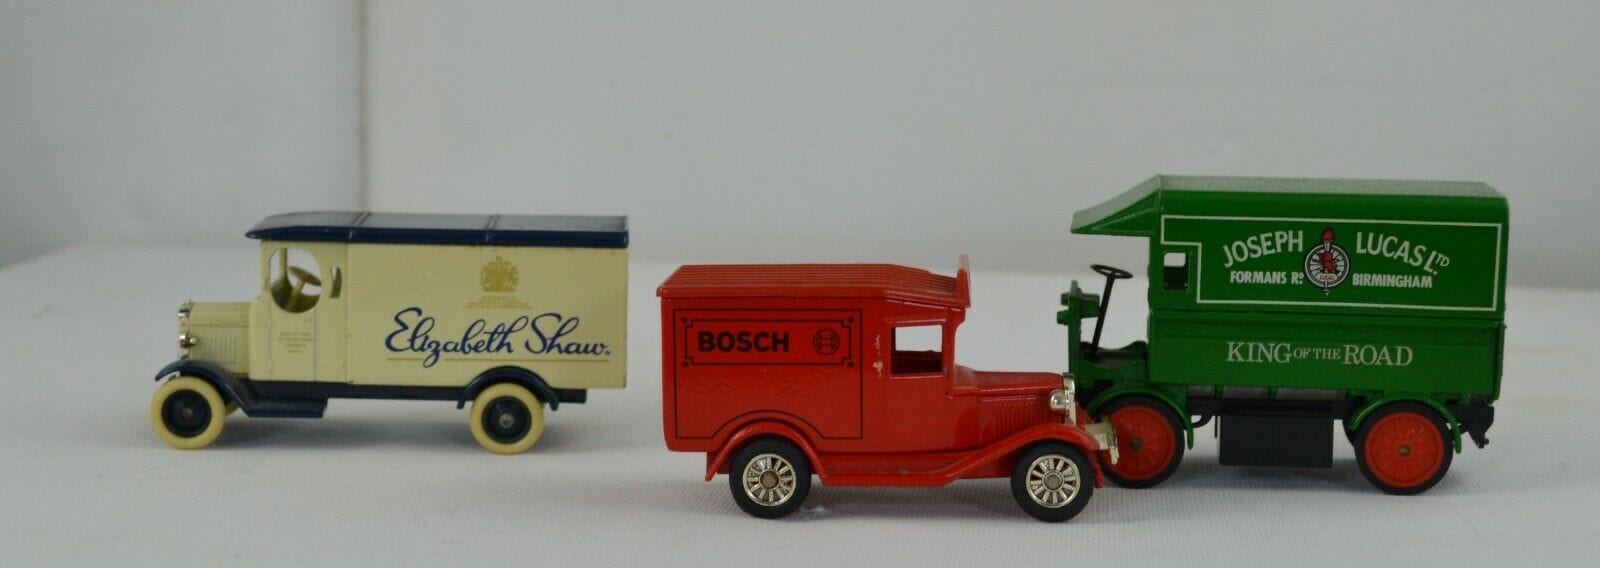 MODEL CARS CORGI MATCHBOX AND LLEDO VEHICLES TOTAL 15(PREVIOUSLY OWNED) GOOD CONDITION - TMD167207